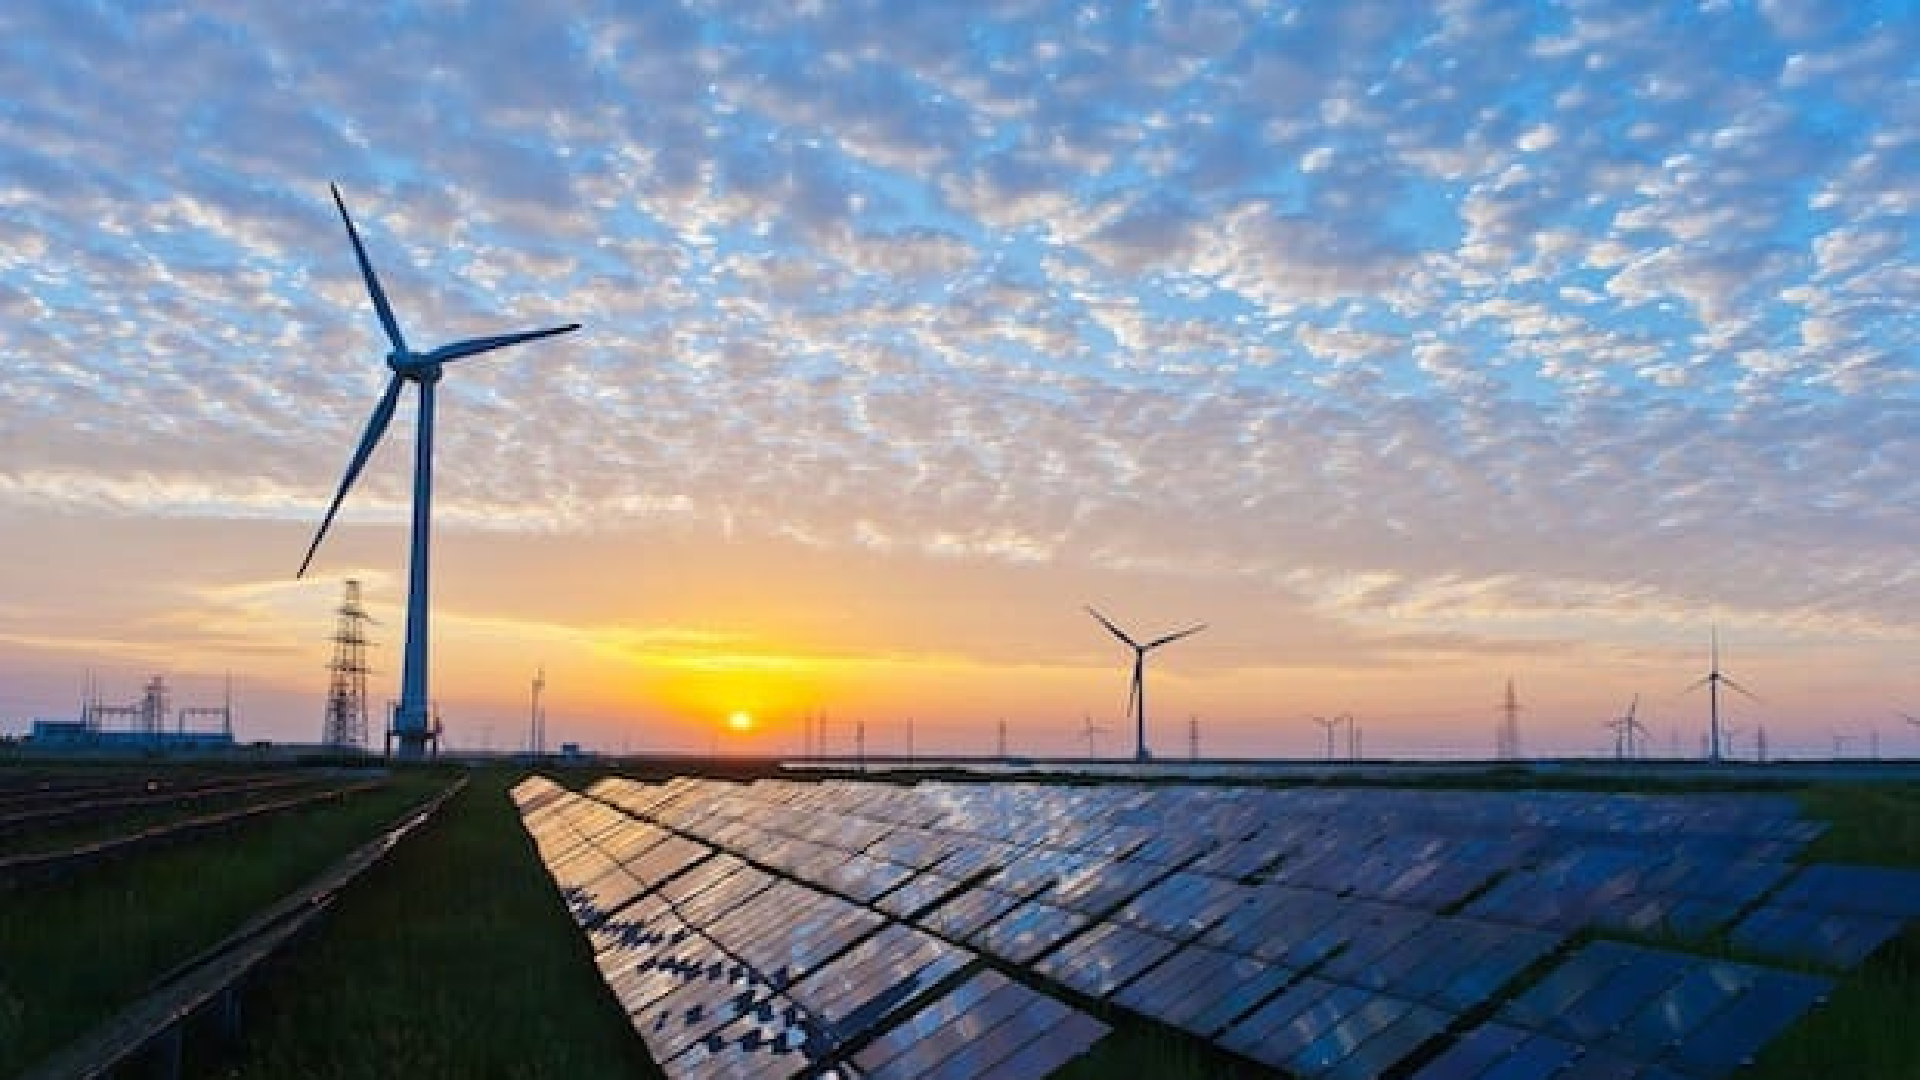 Local Focus: Expanding Iberian energy - Wind, solar and storage growth on the peninsula